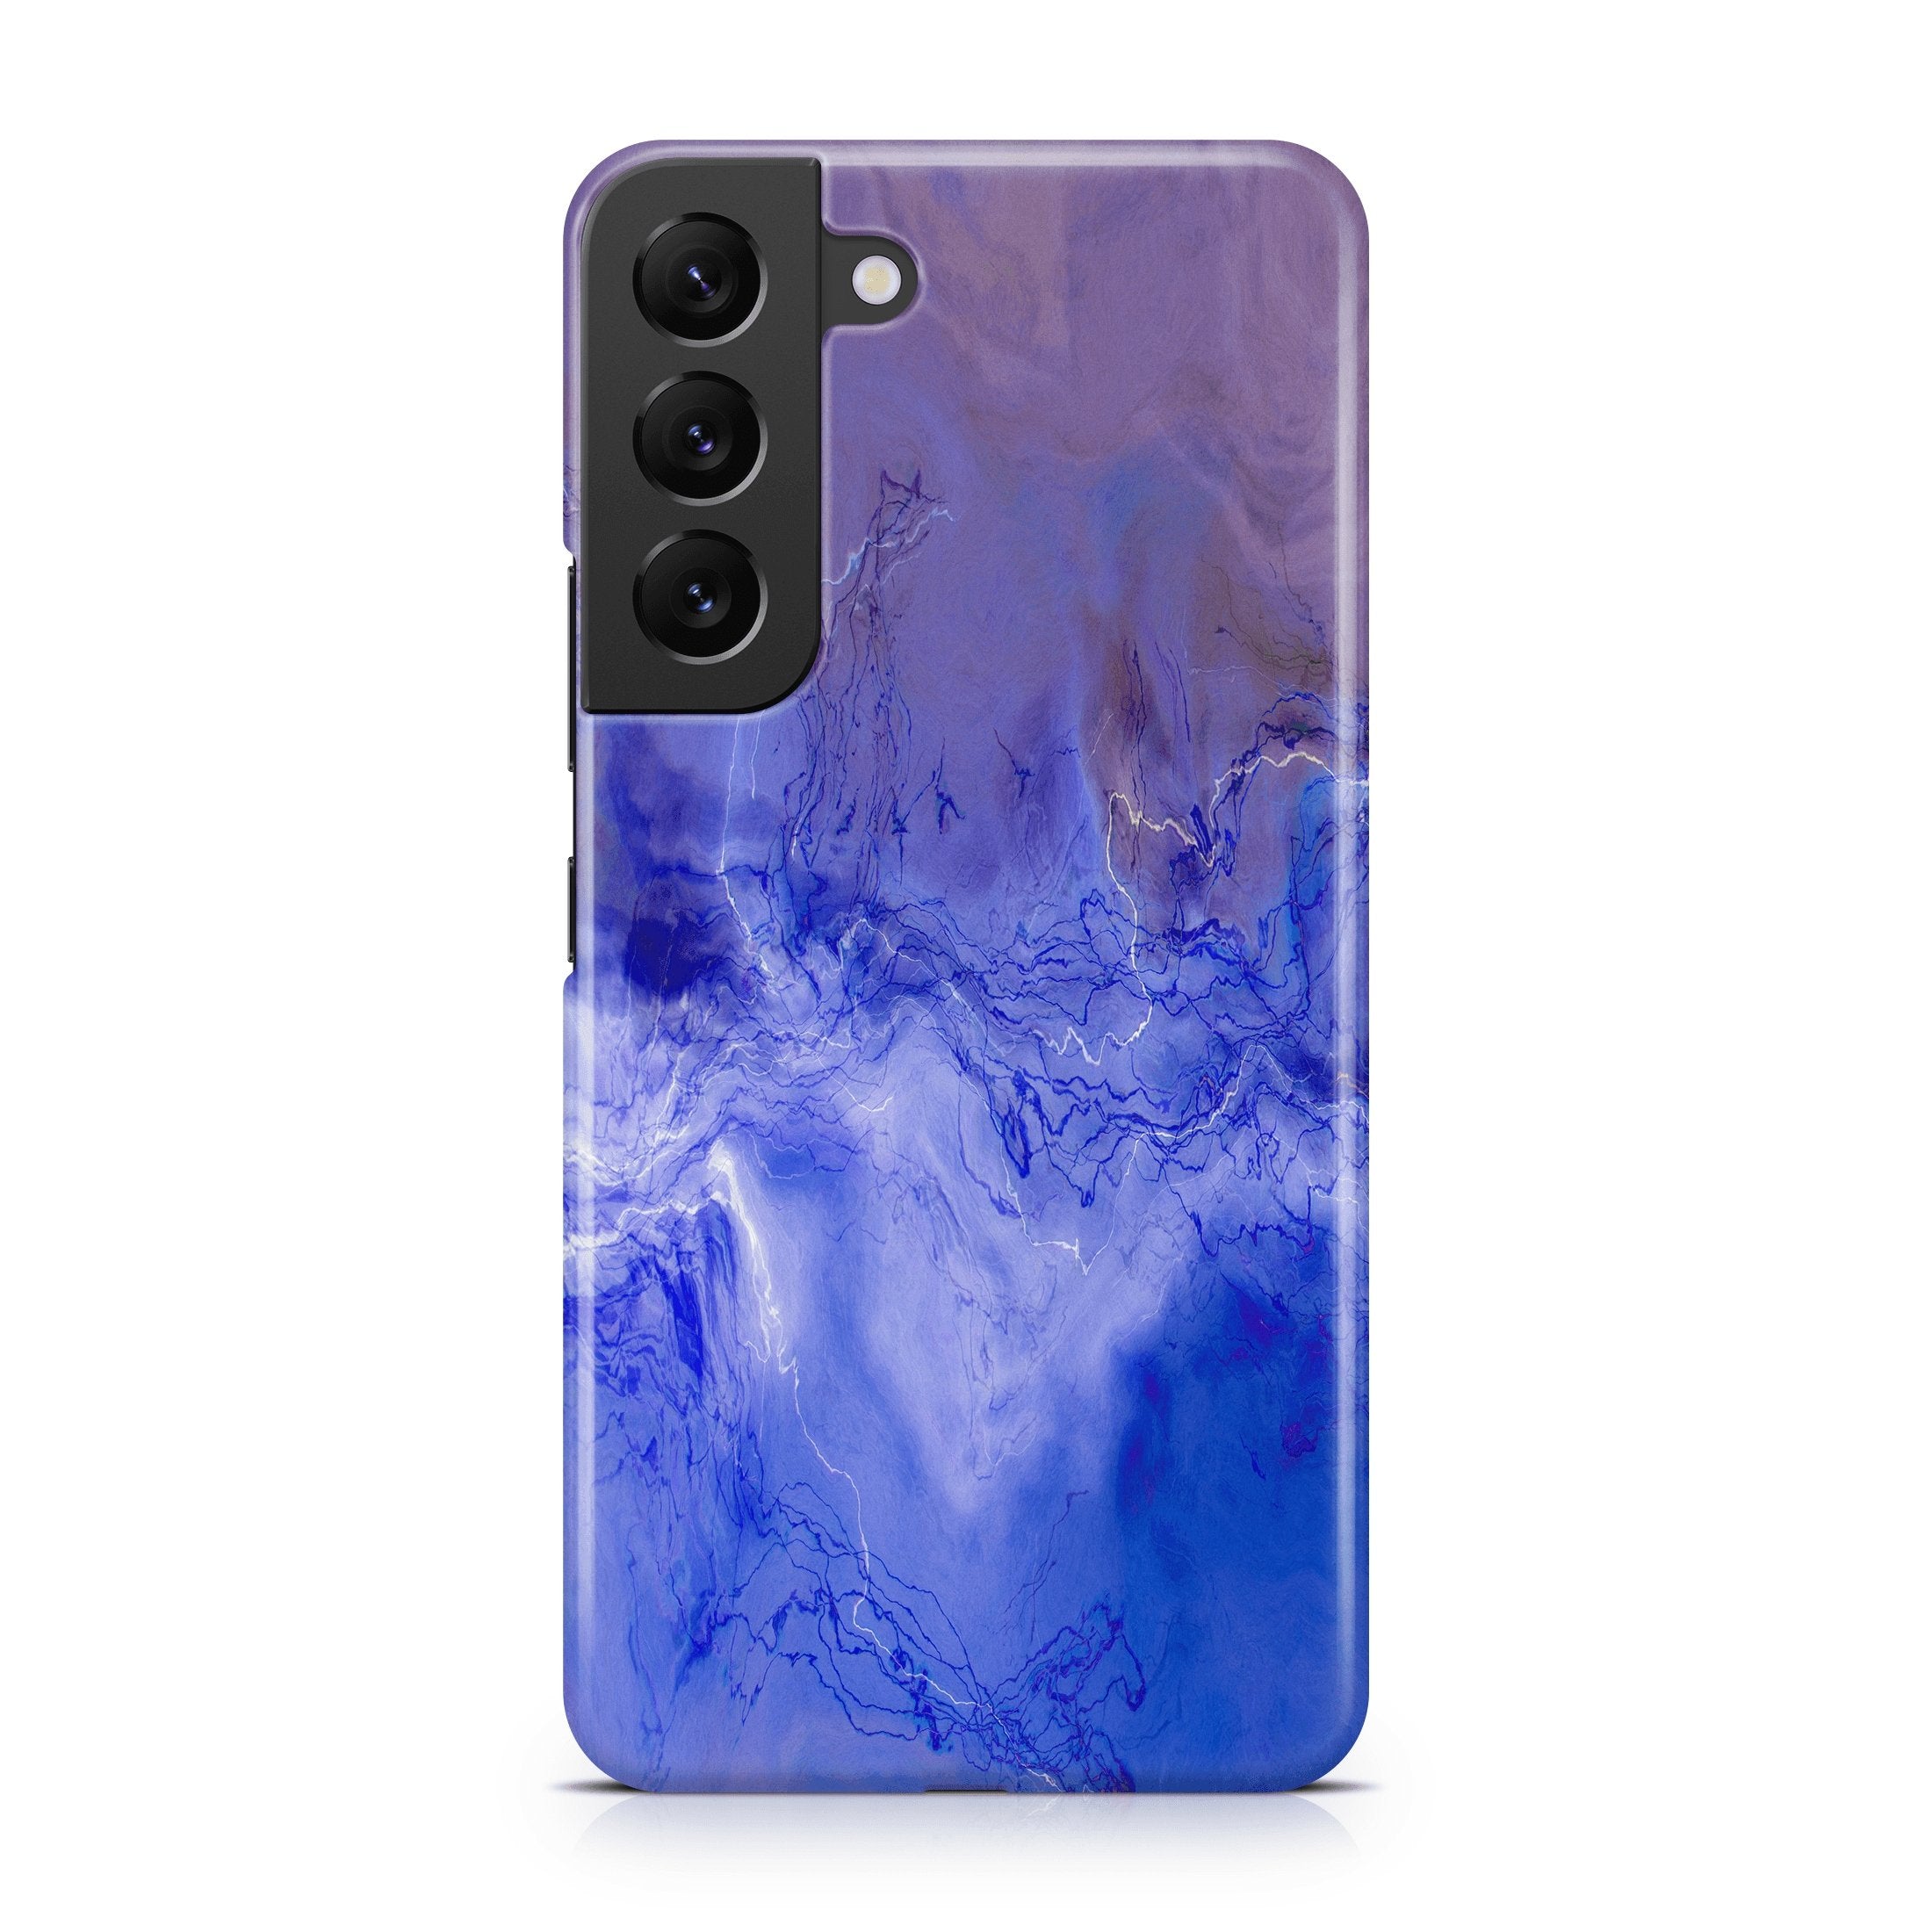 Marble's Eye - Samsung phone case designs by CaseSwagger 